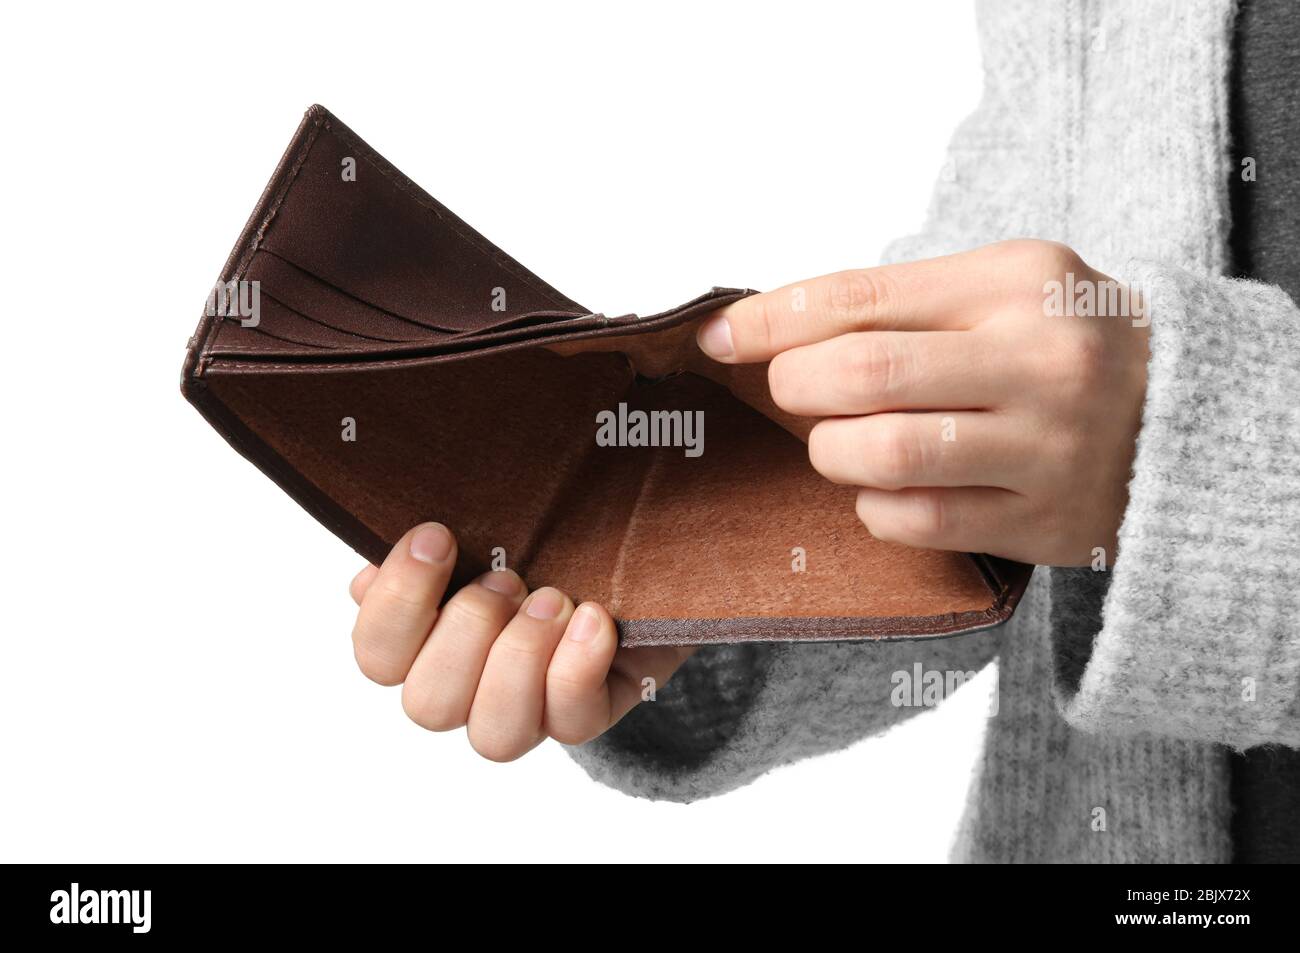 Empty purse in hands Stock Photo - Alamy